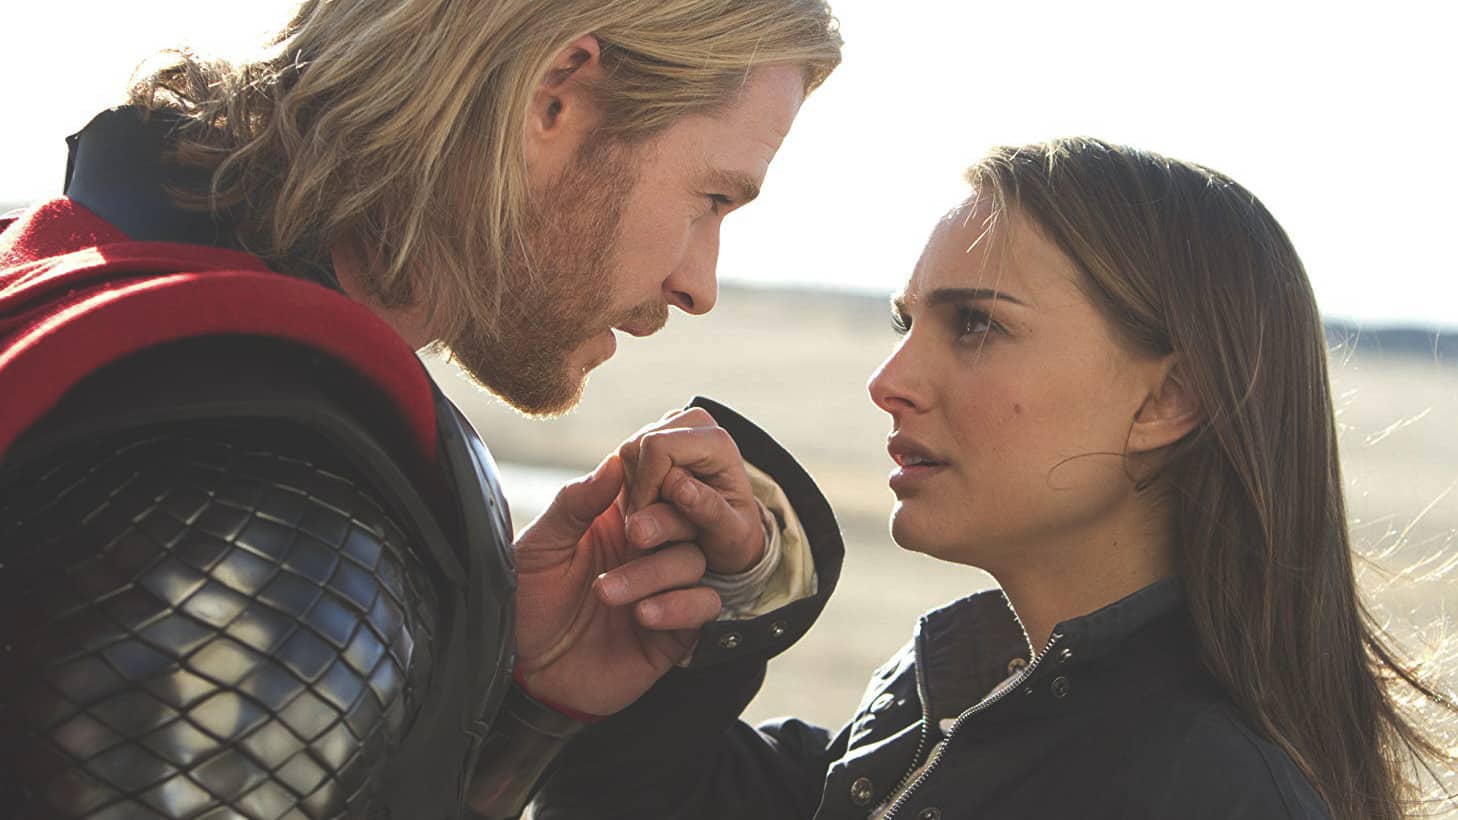 thor-and-jane-foster-in-phase-1-of-the-marvel-cinematic-universe